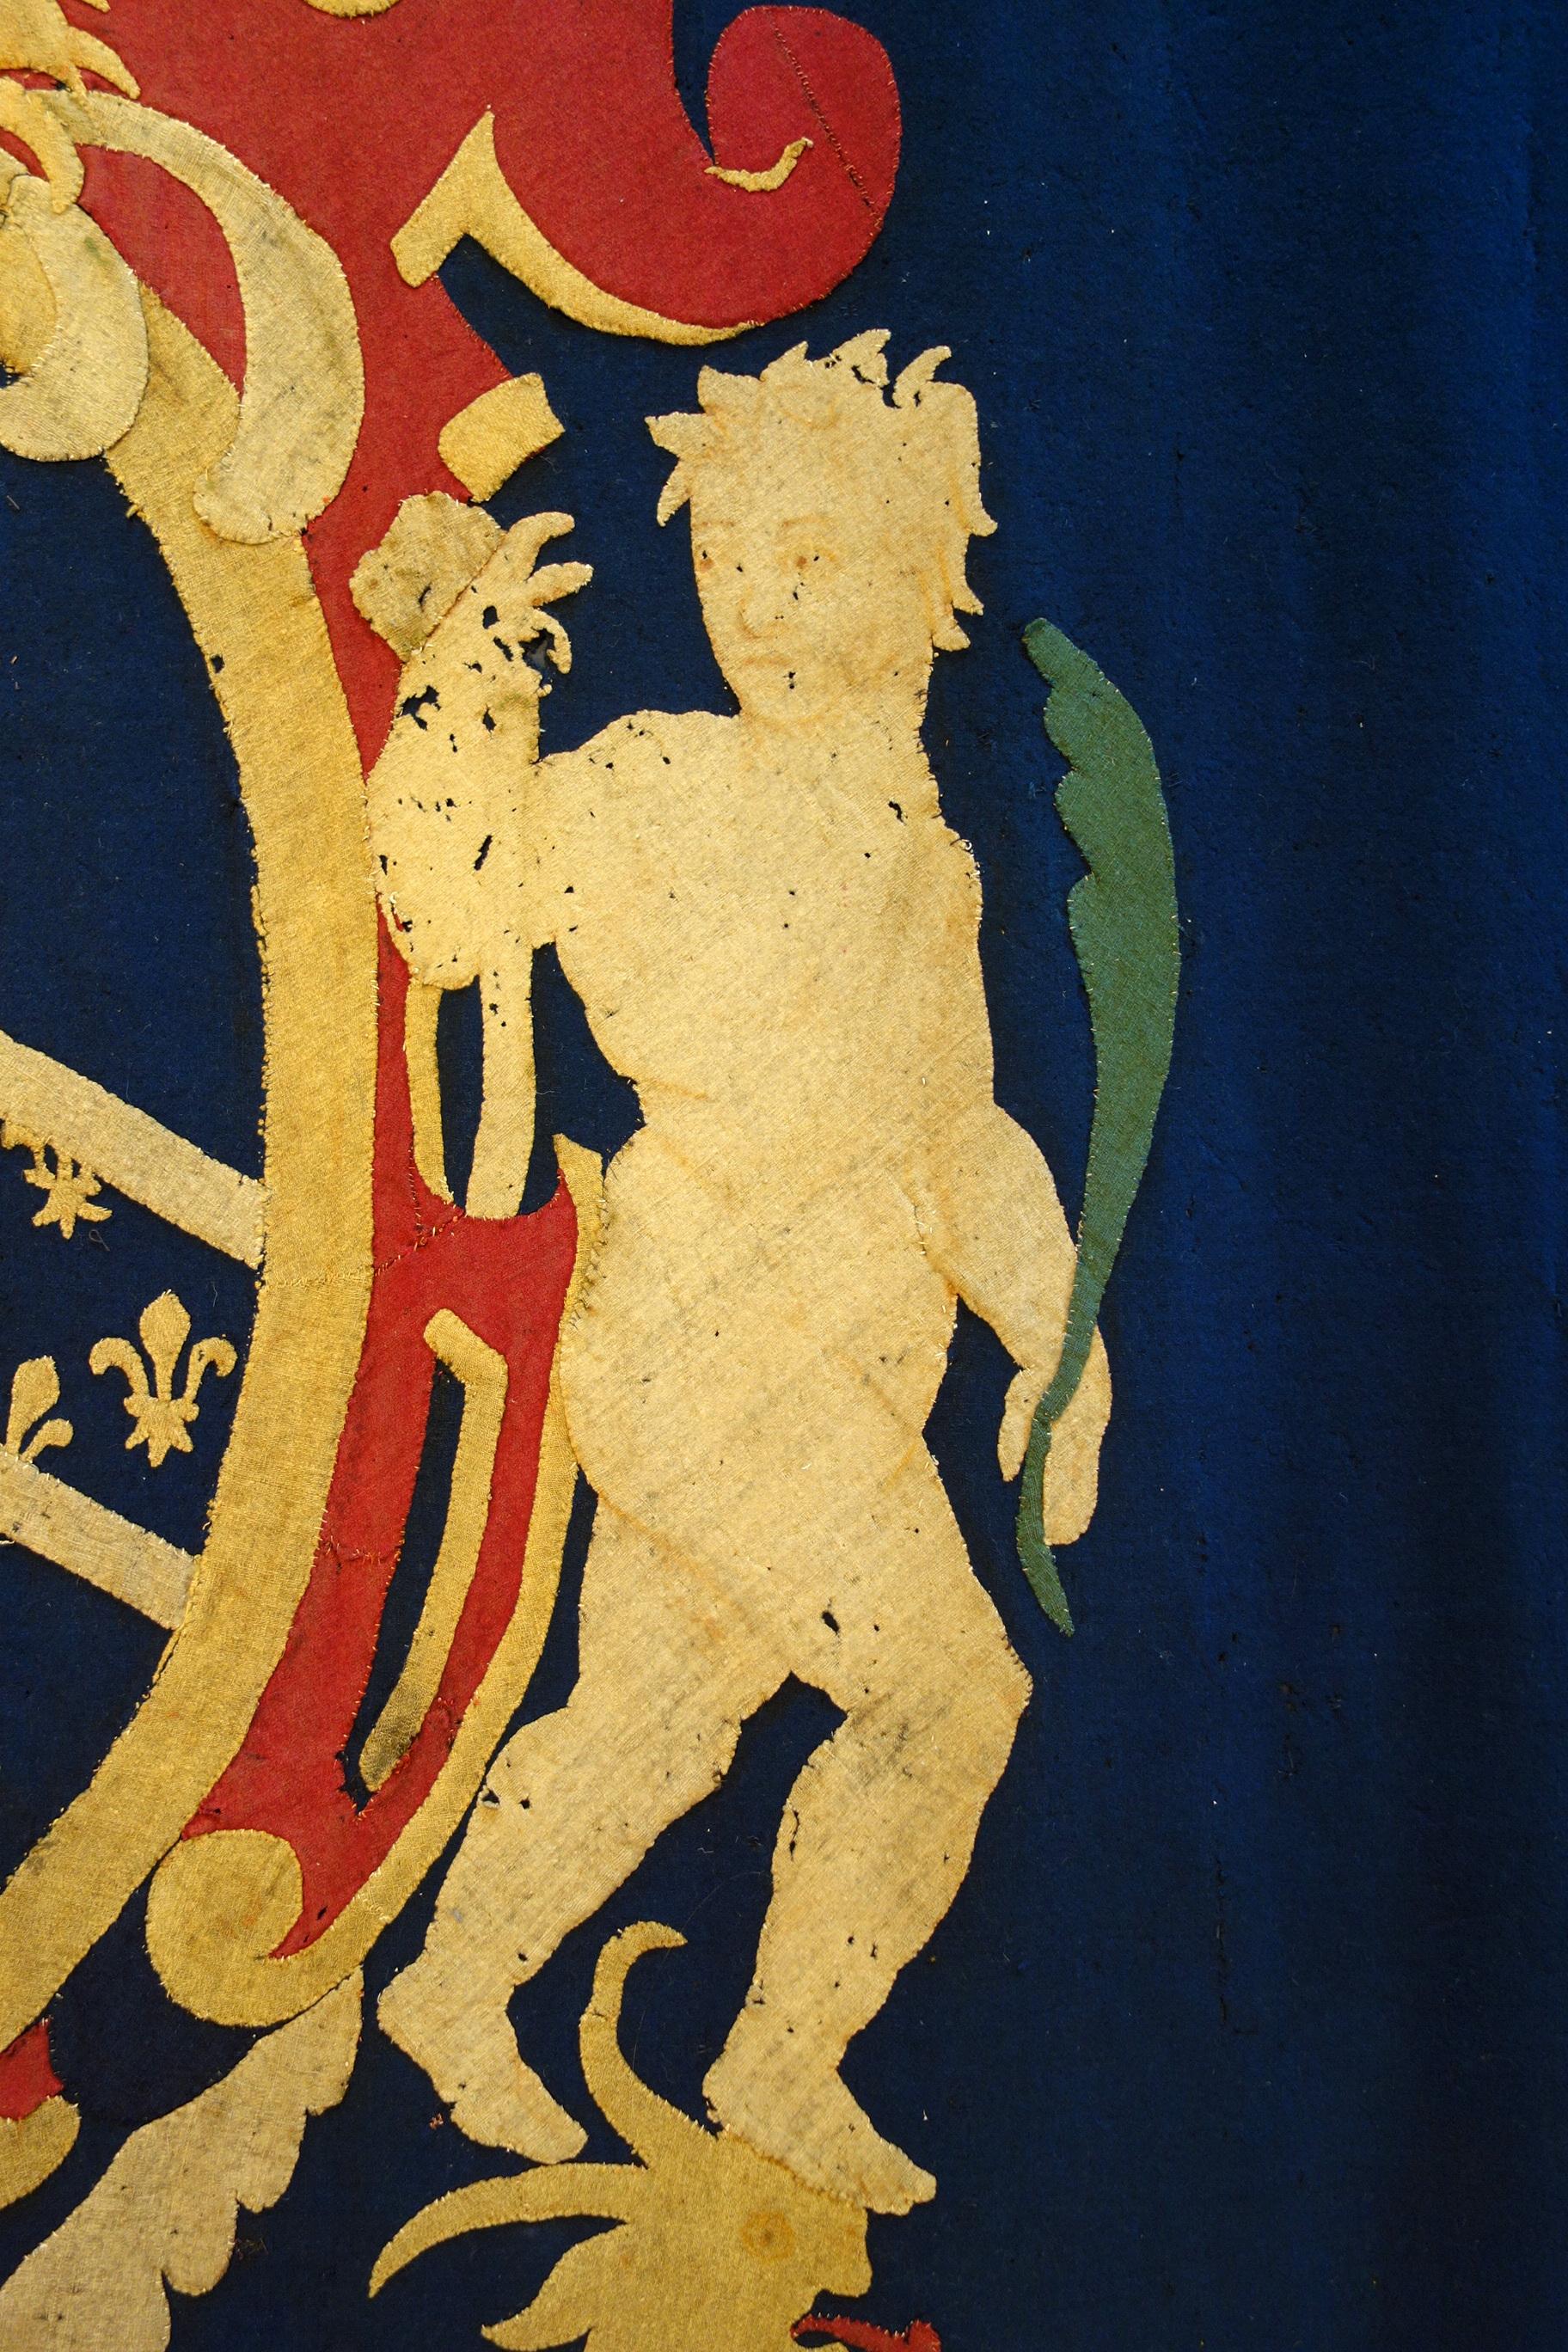 Baroque Late 17th Century Italian Heraldic Coat of Arms Tapestry, Lucca, circa 1690 For Sale